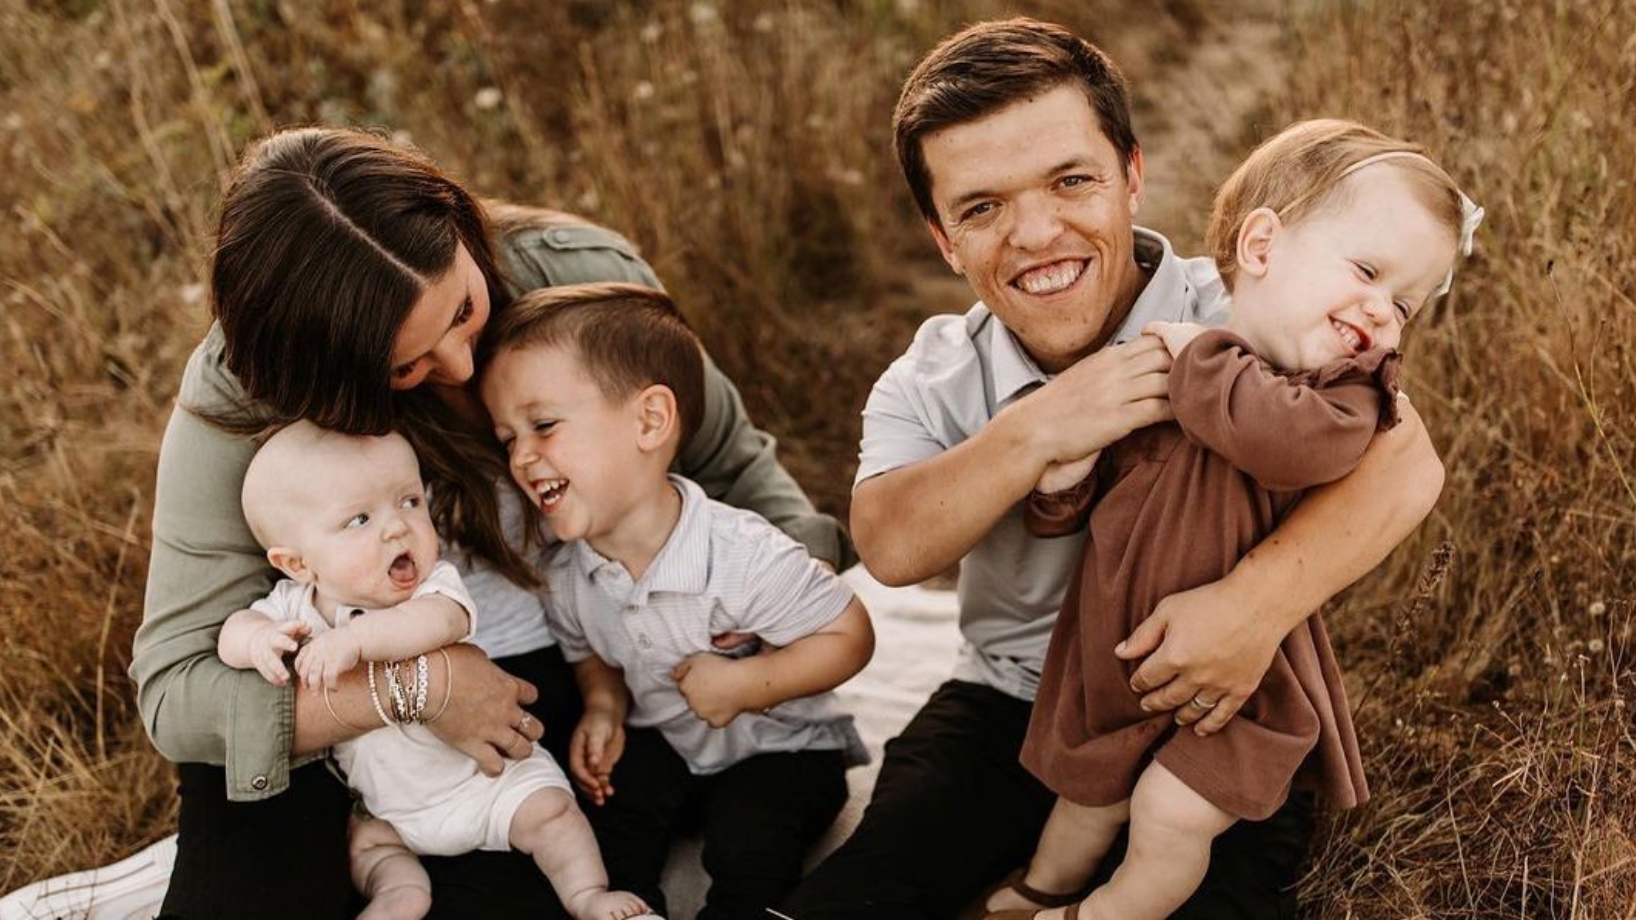 Tori Roloff: Moms Were Made for Such a Time as This